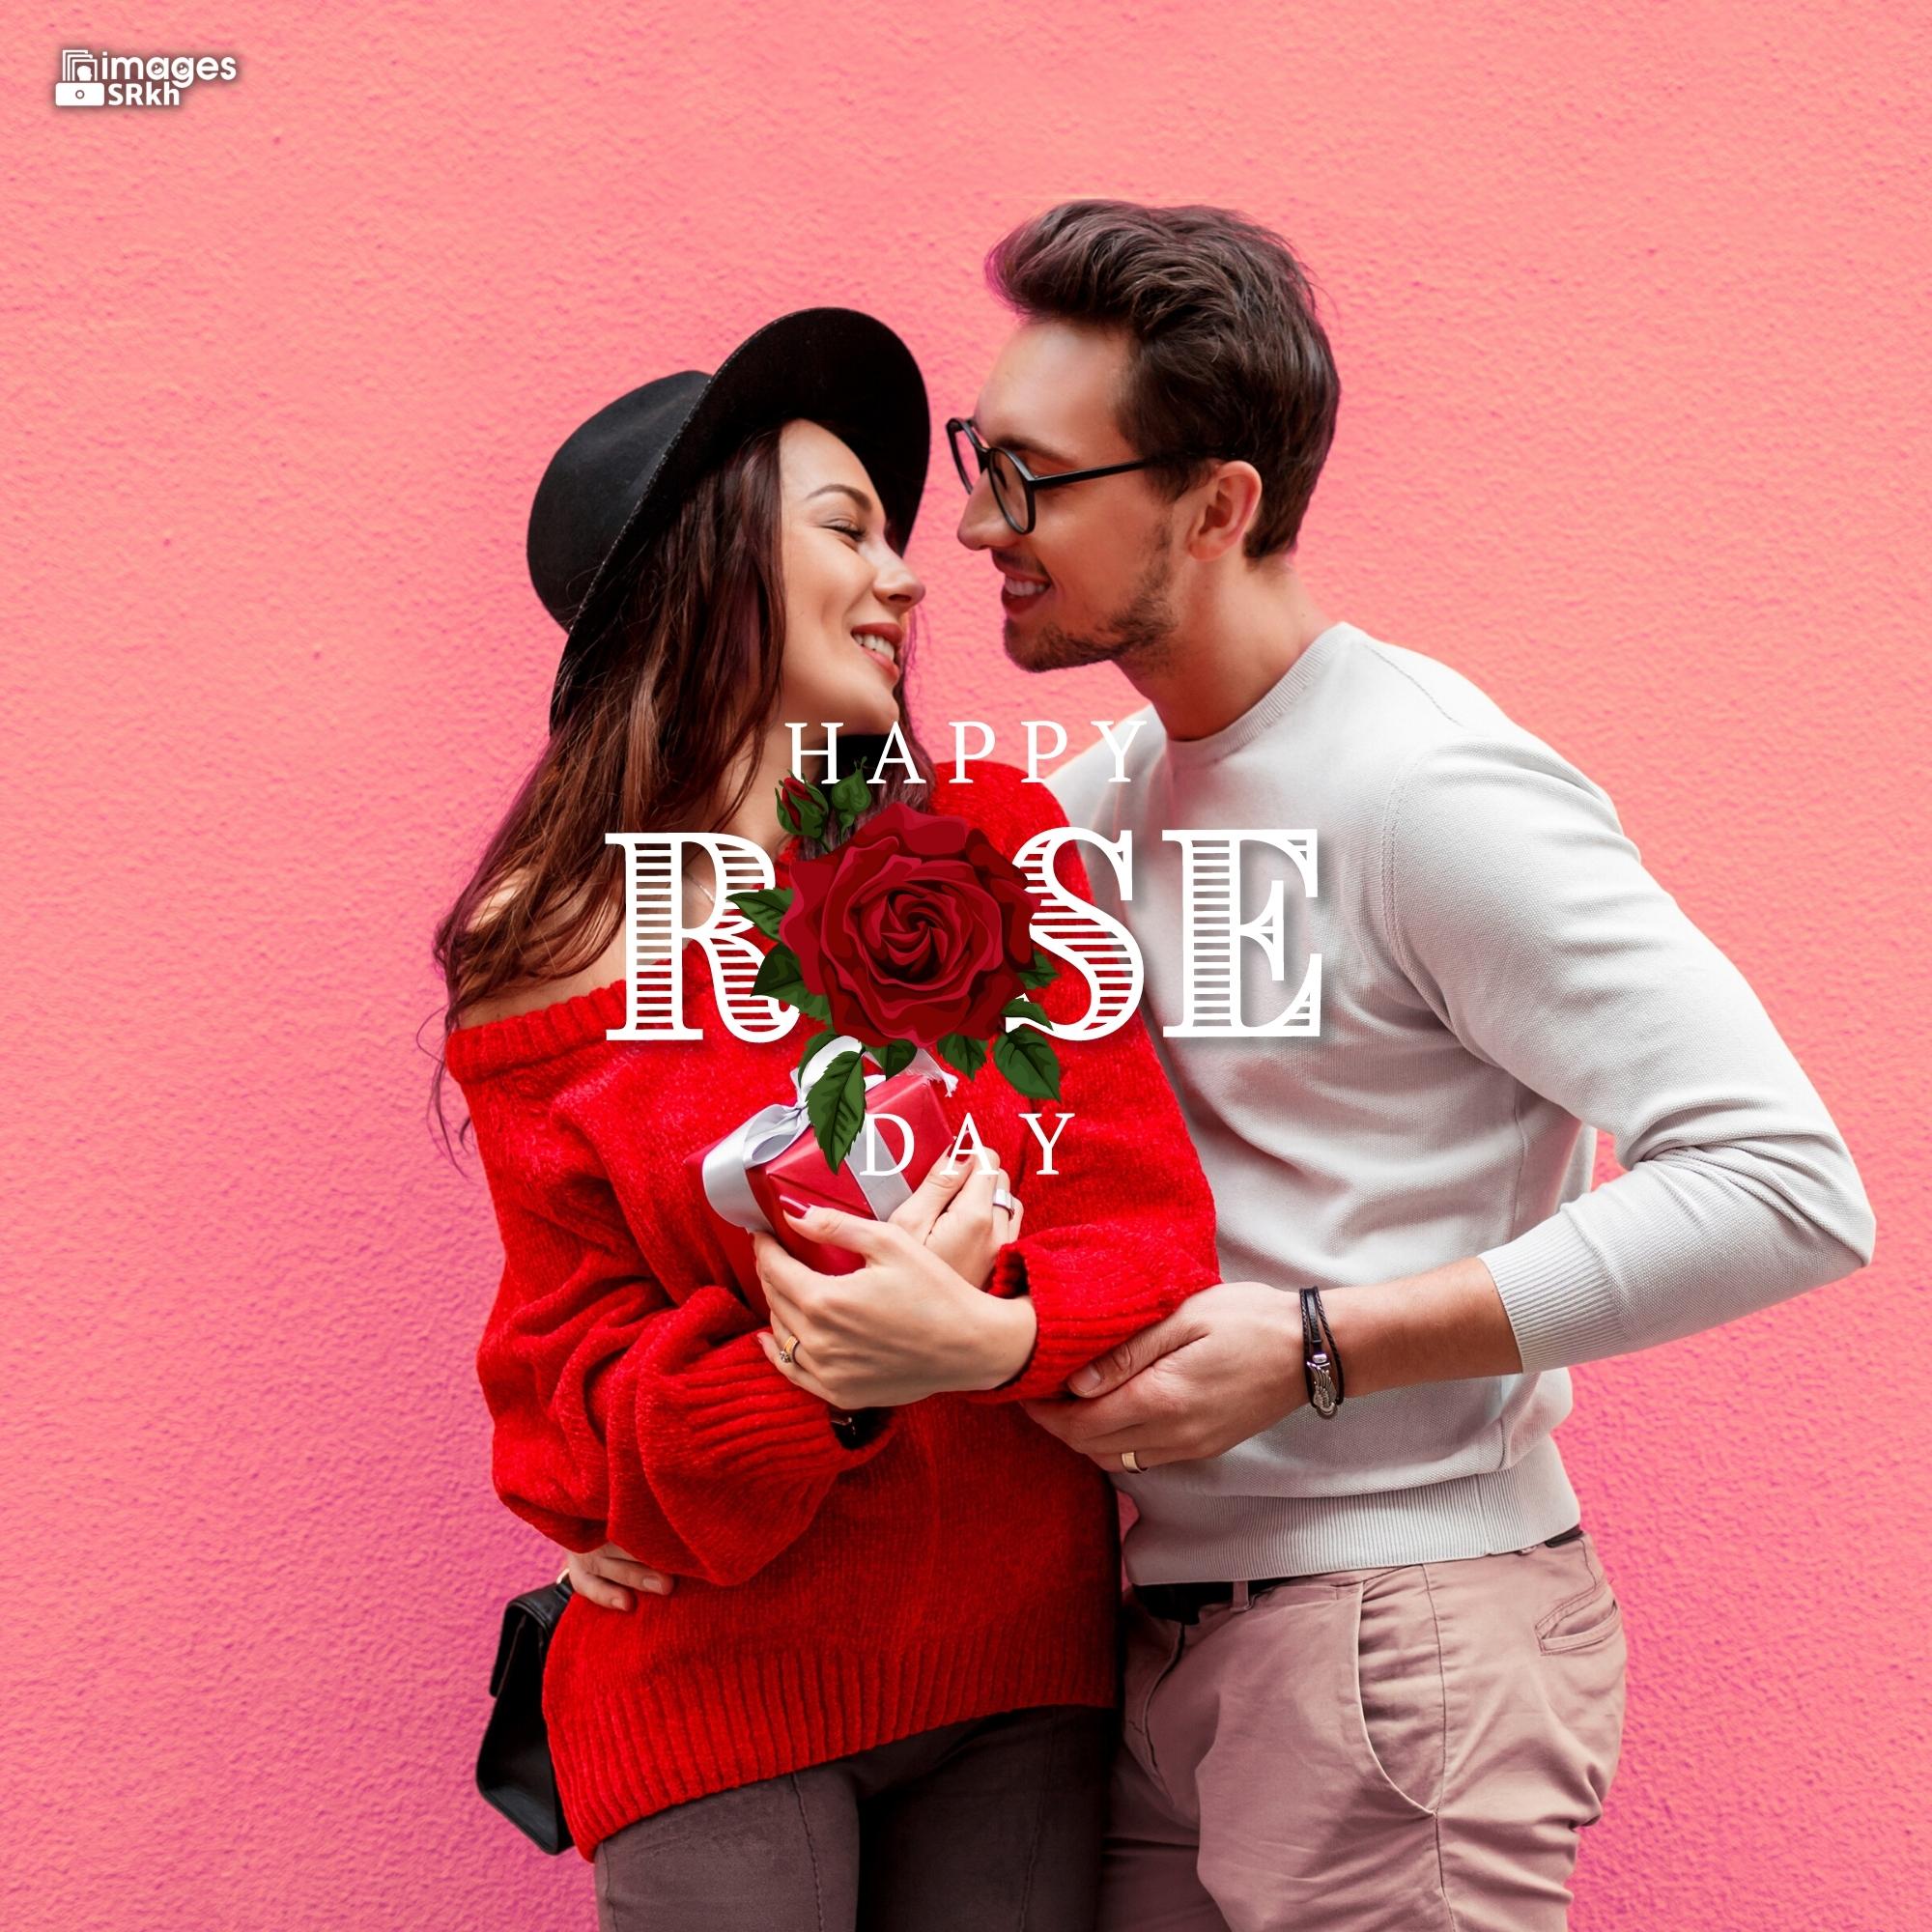 Romantic Rose Day Images Hd Download (12)